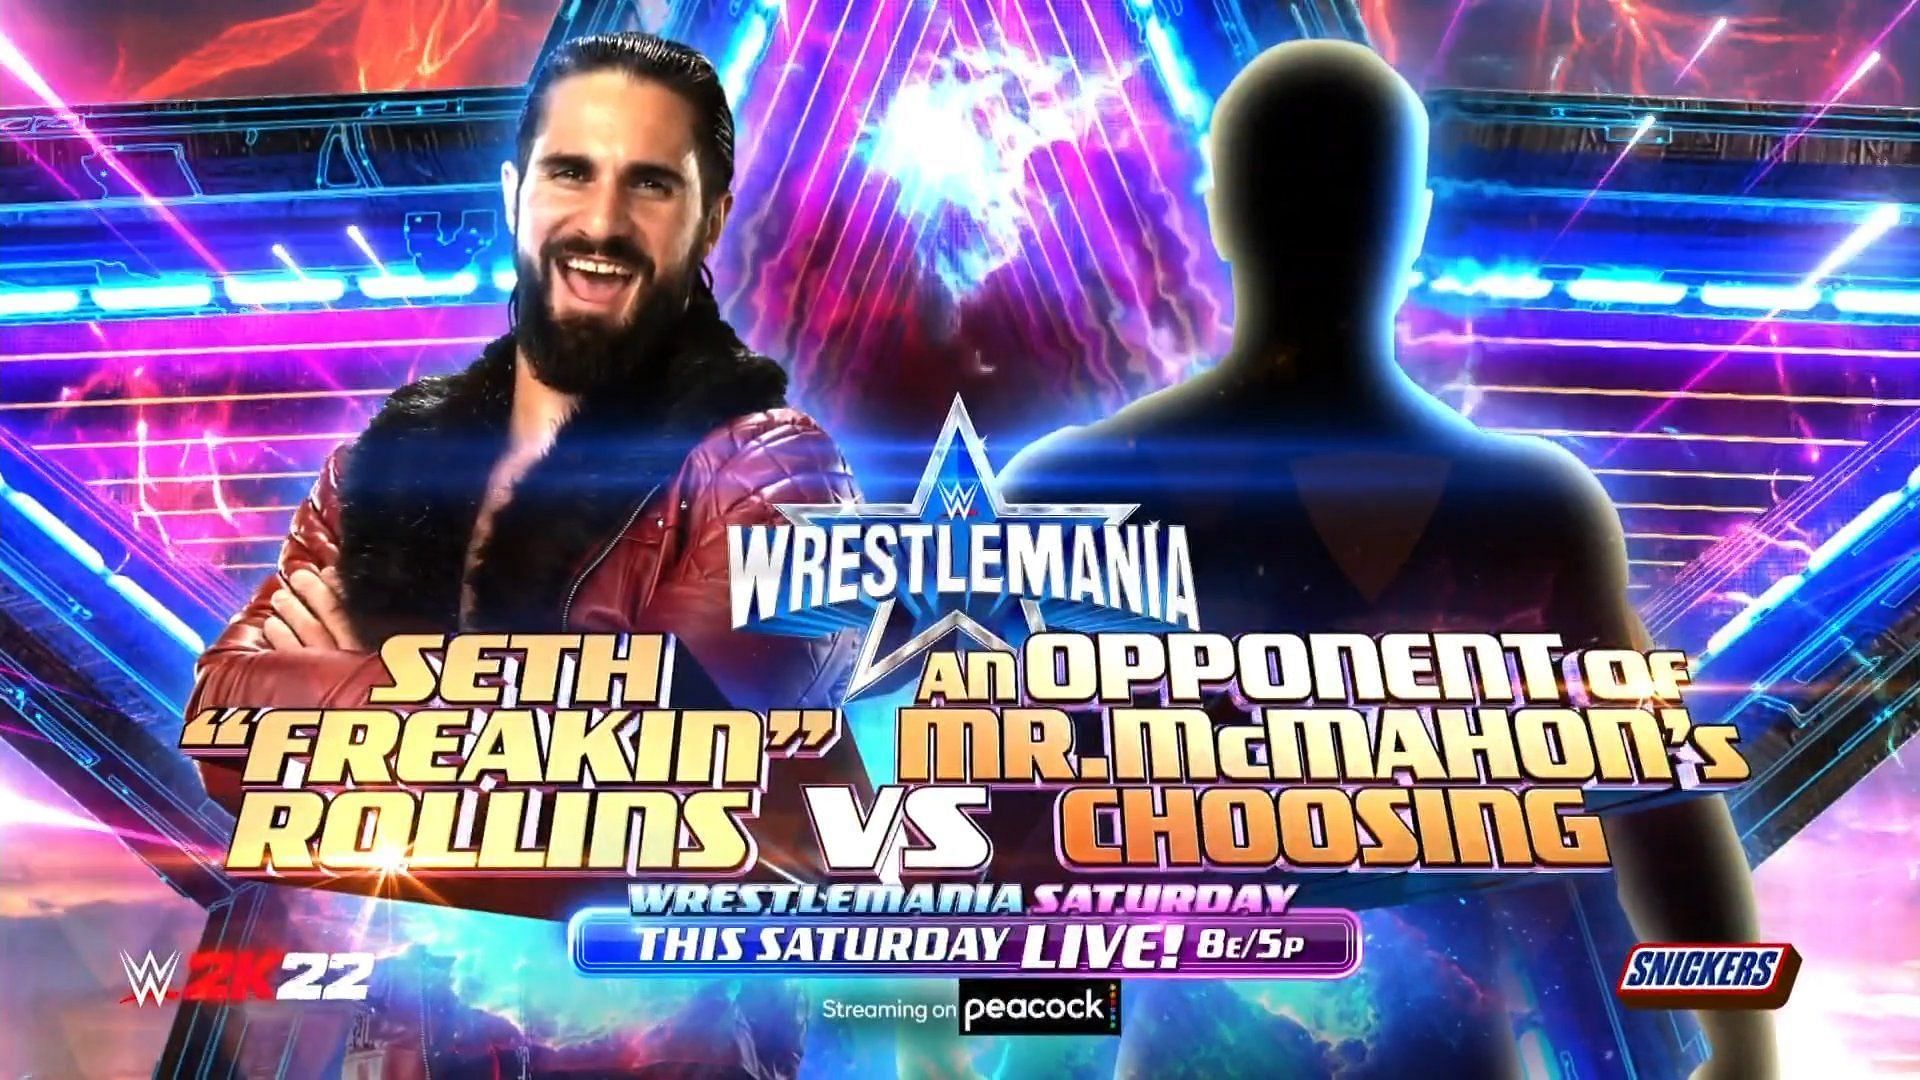 Rumors are swirling around who will meet Seth Rollins at WrestleMania!